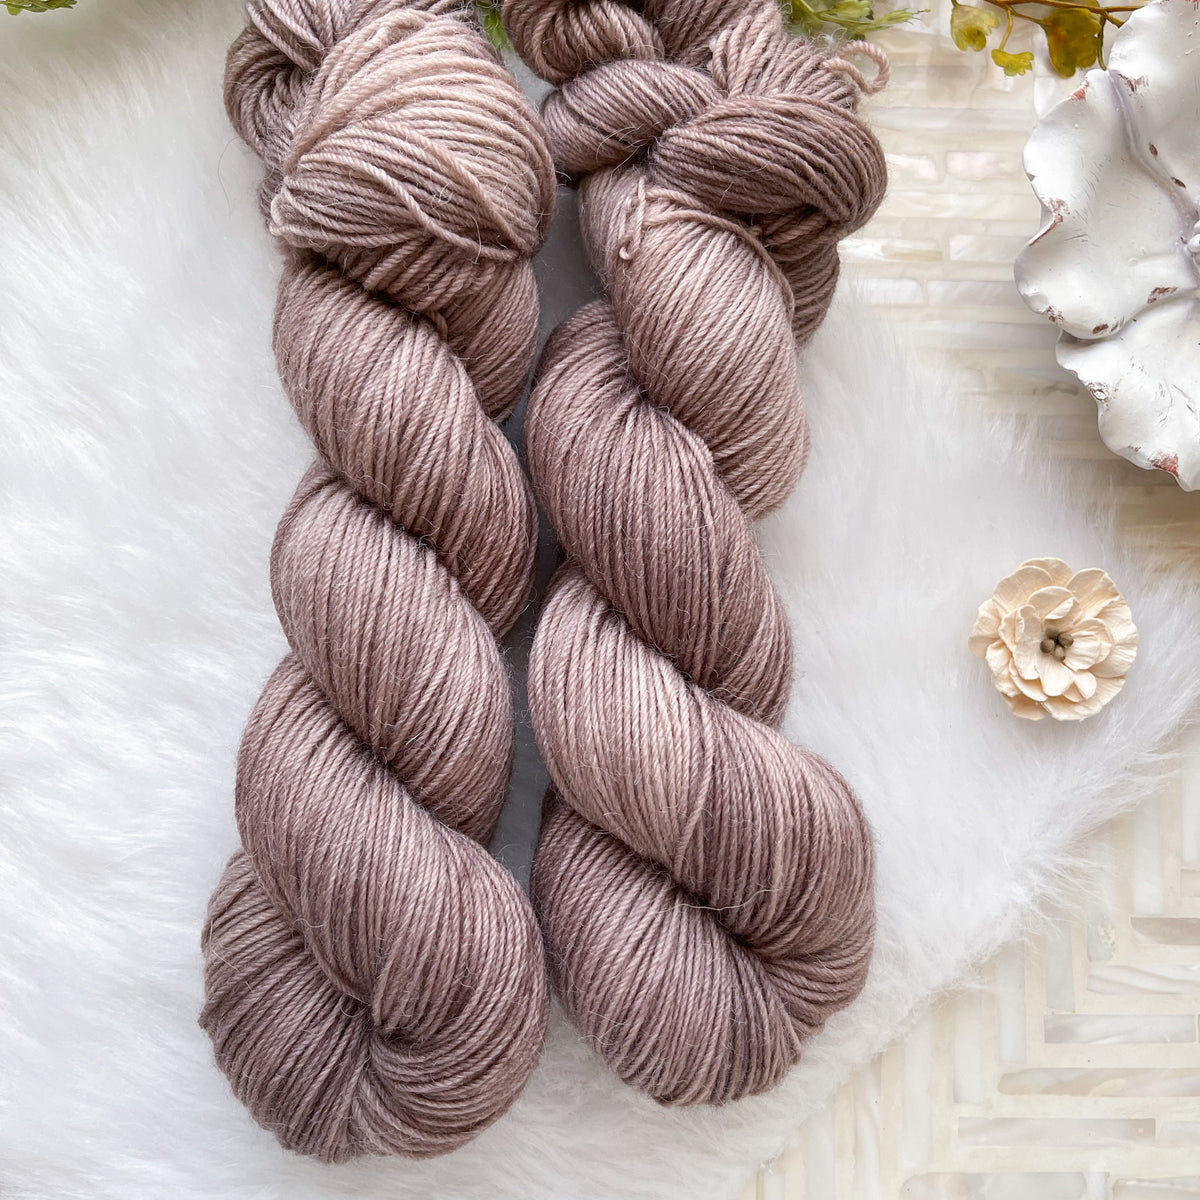 OTTER -Dyed to Order - Dreamy Base Handdyed Yarn